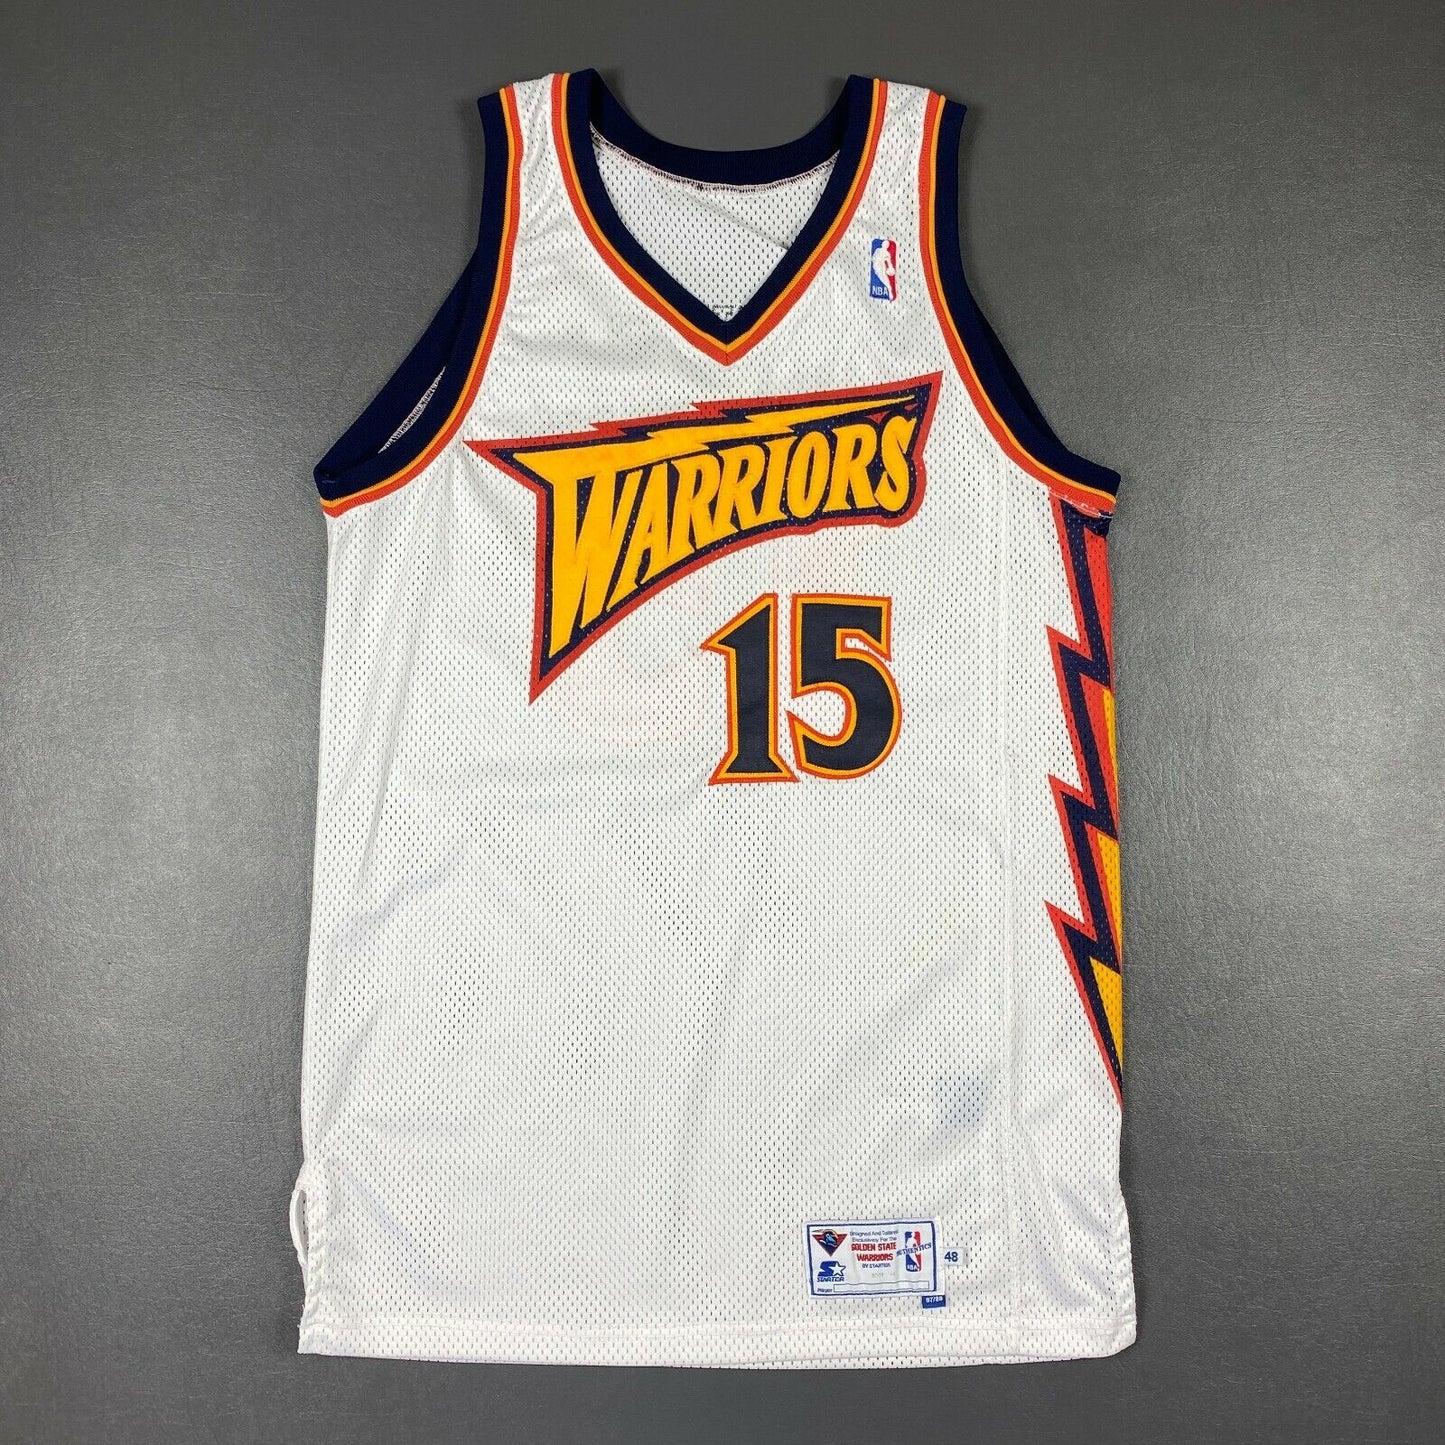 100% Authentic Latrell Sprewell 1997 1998 Warriors Pro Cut Game Jersey 48+4"